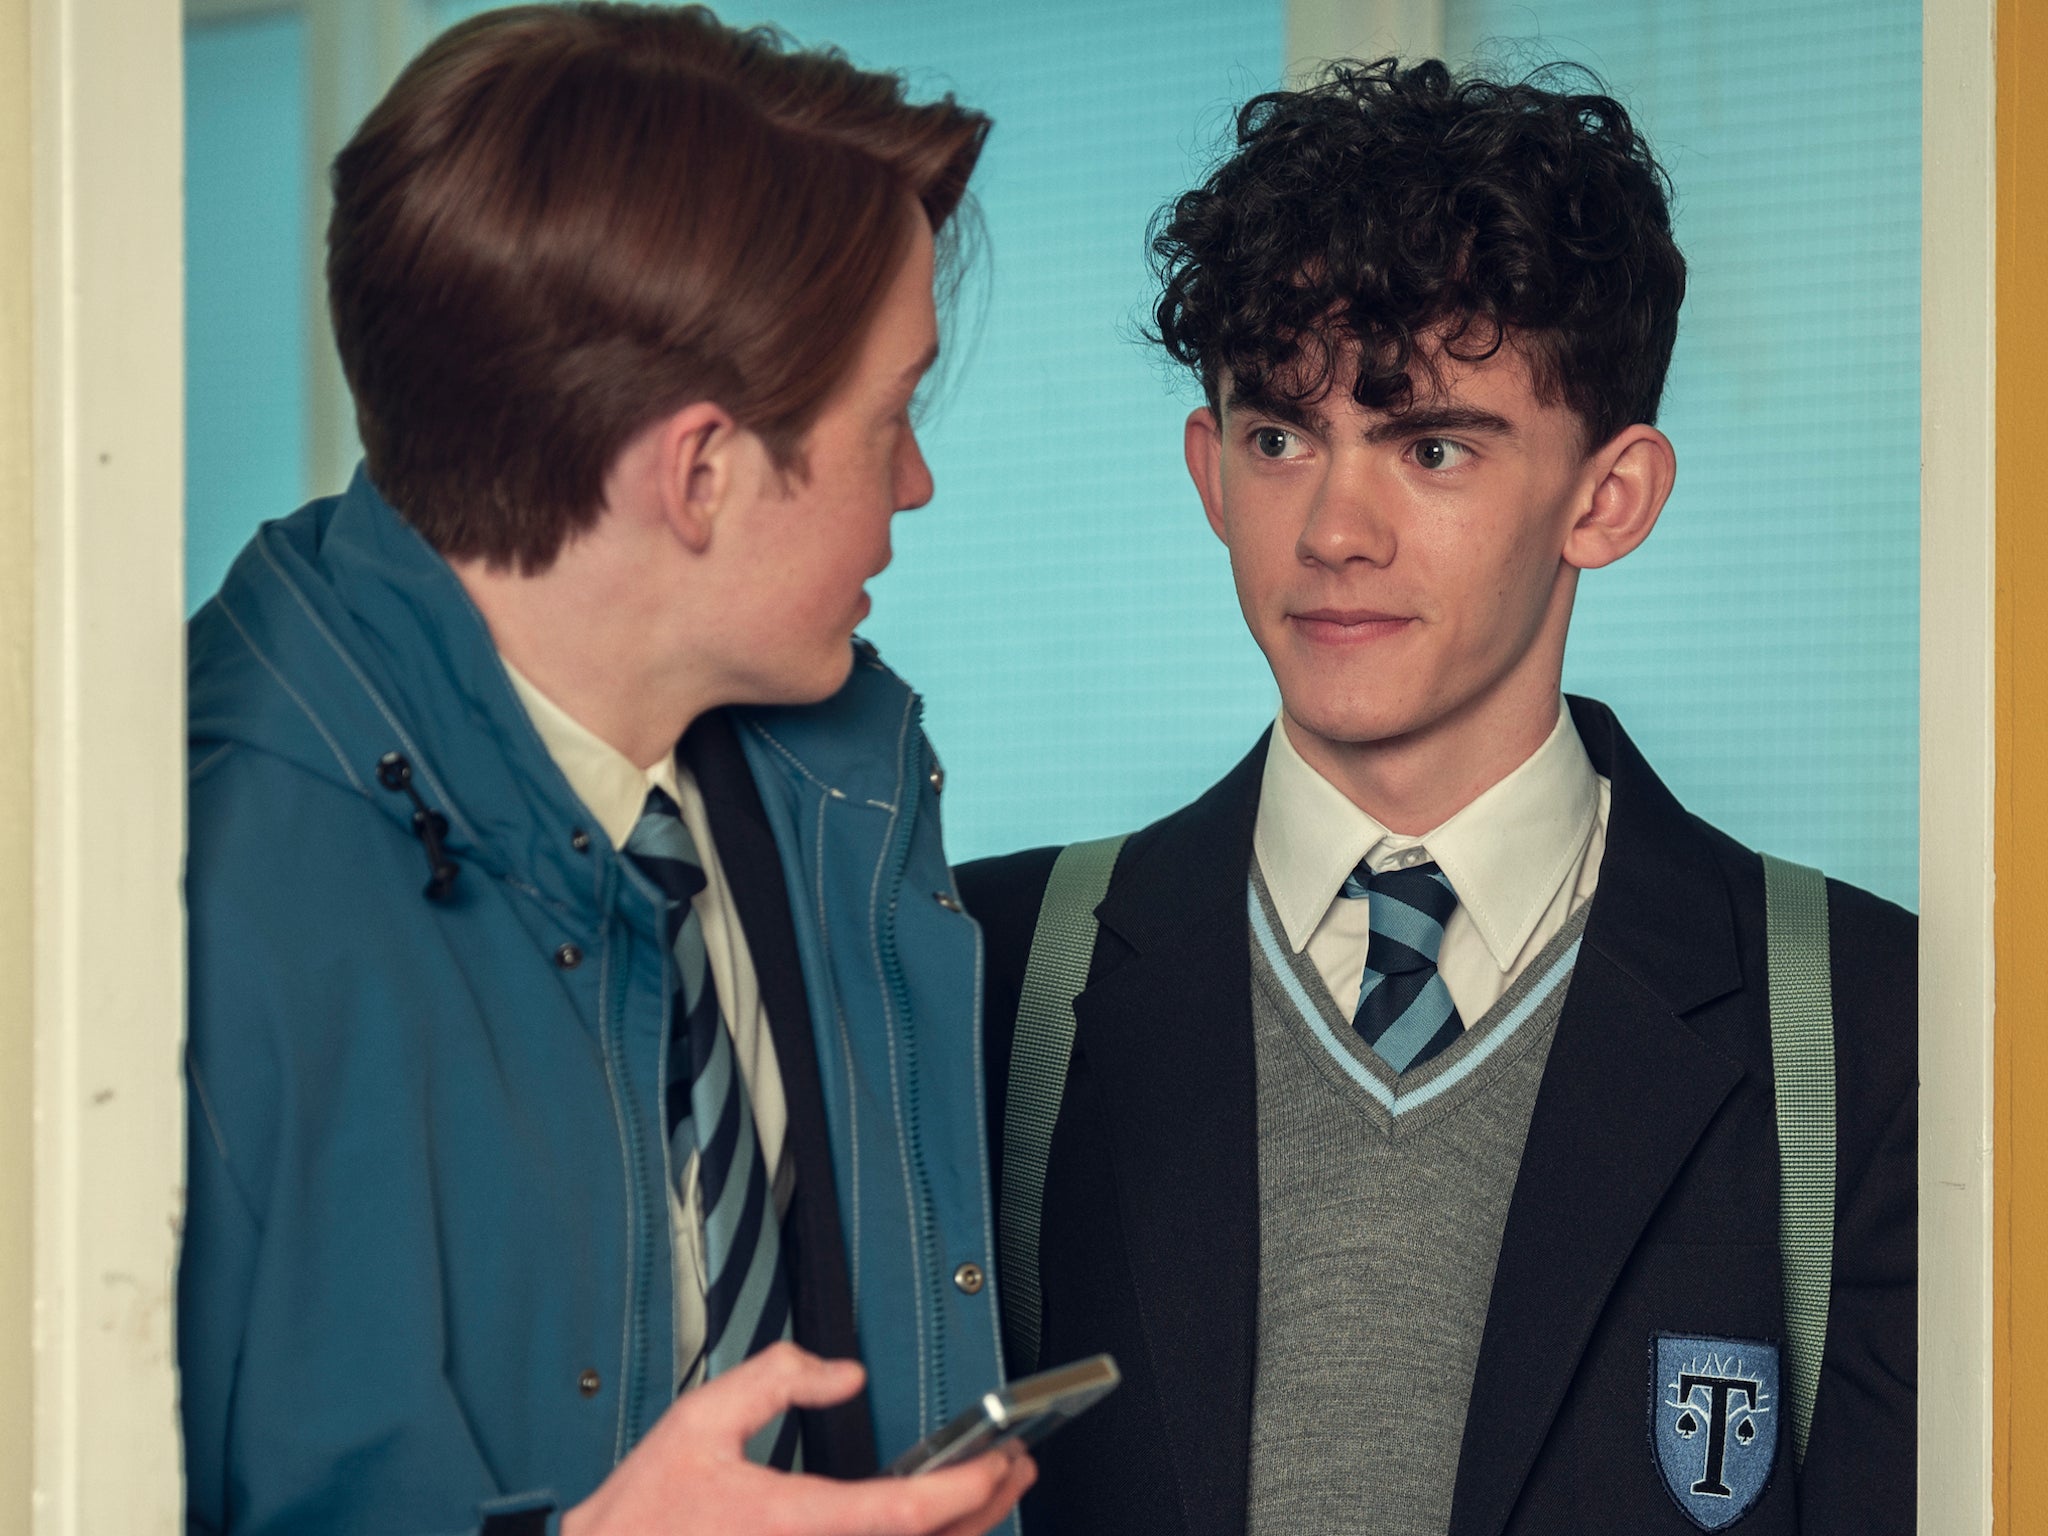 I use clips from the Netflix series Heartstopper to explore gay relationships, teenage friendships and bullying